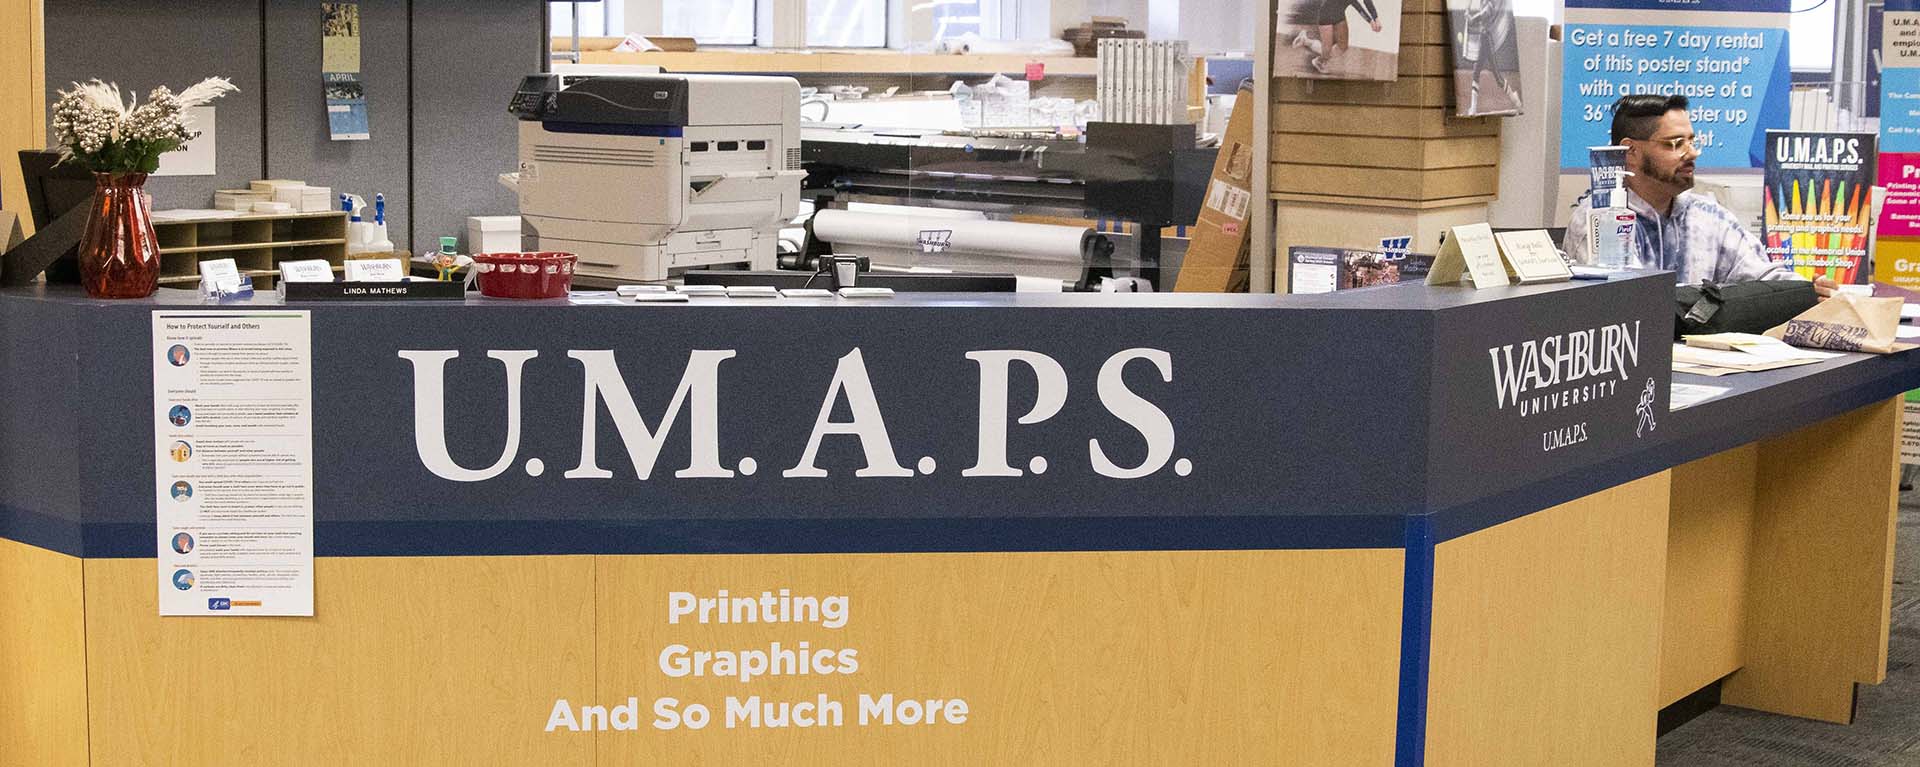 UMAPS is located in the Ichabod Shop in the Union.